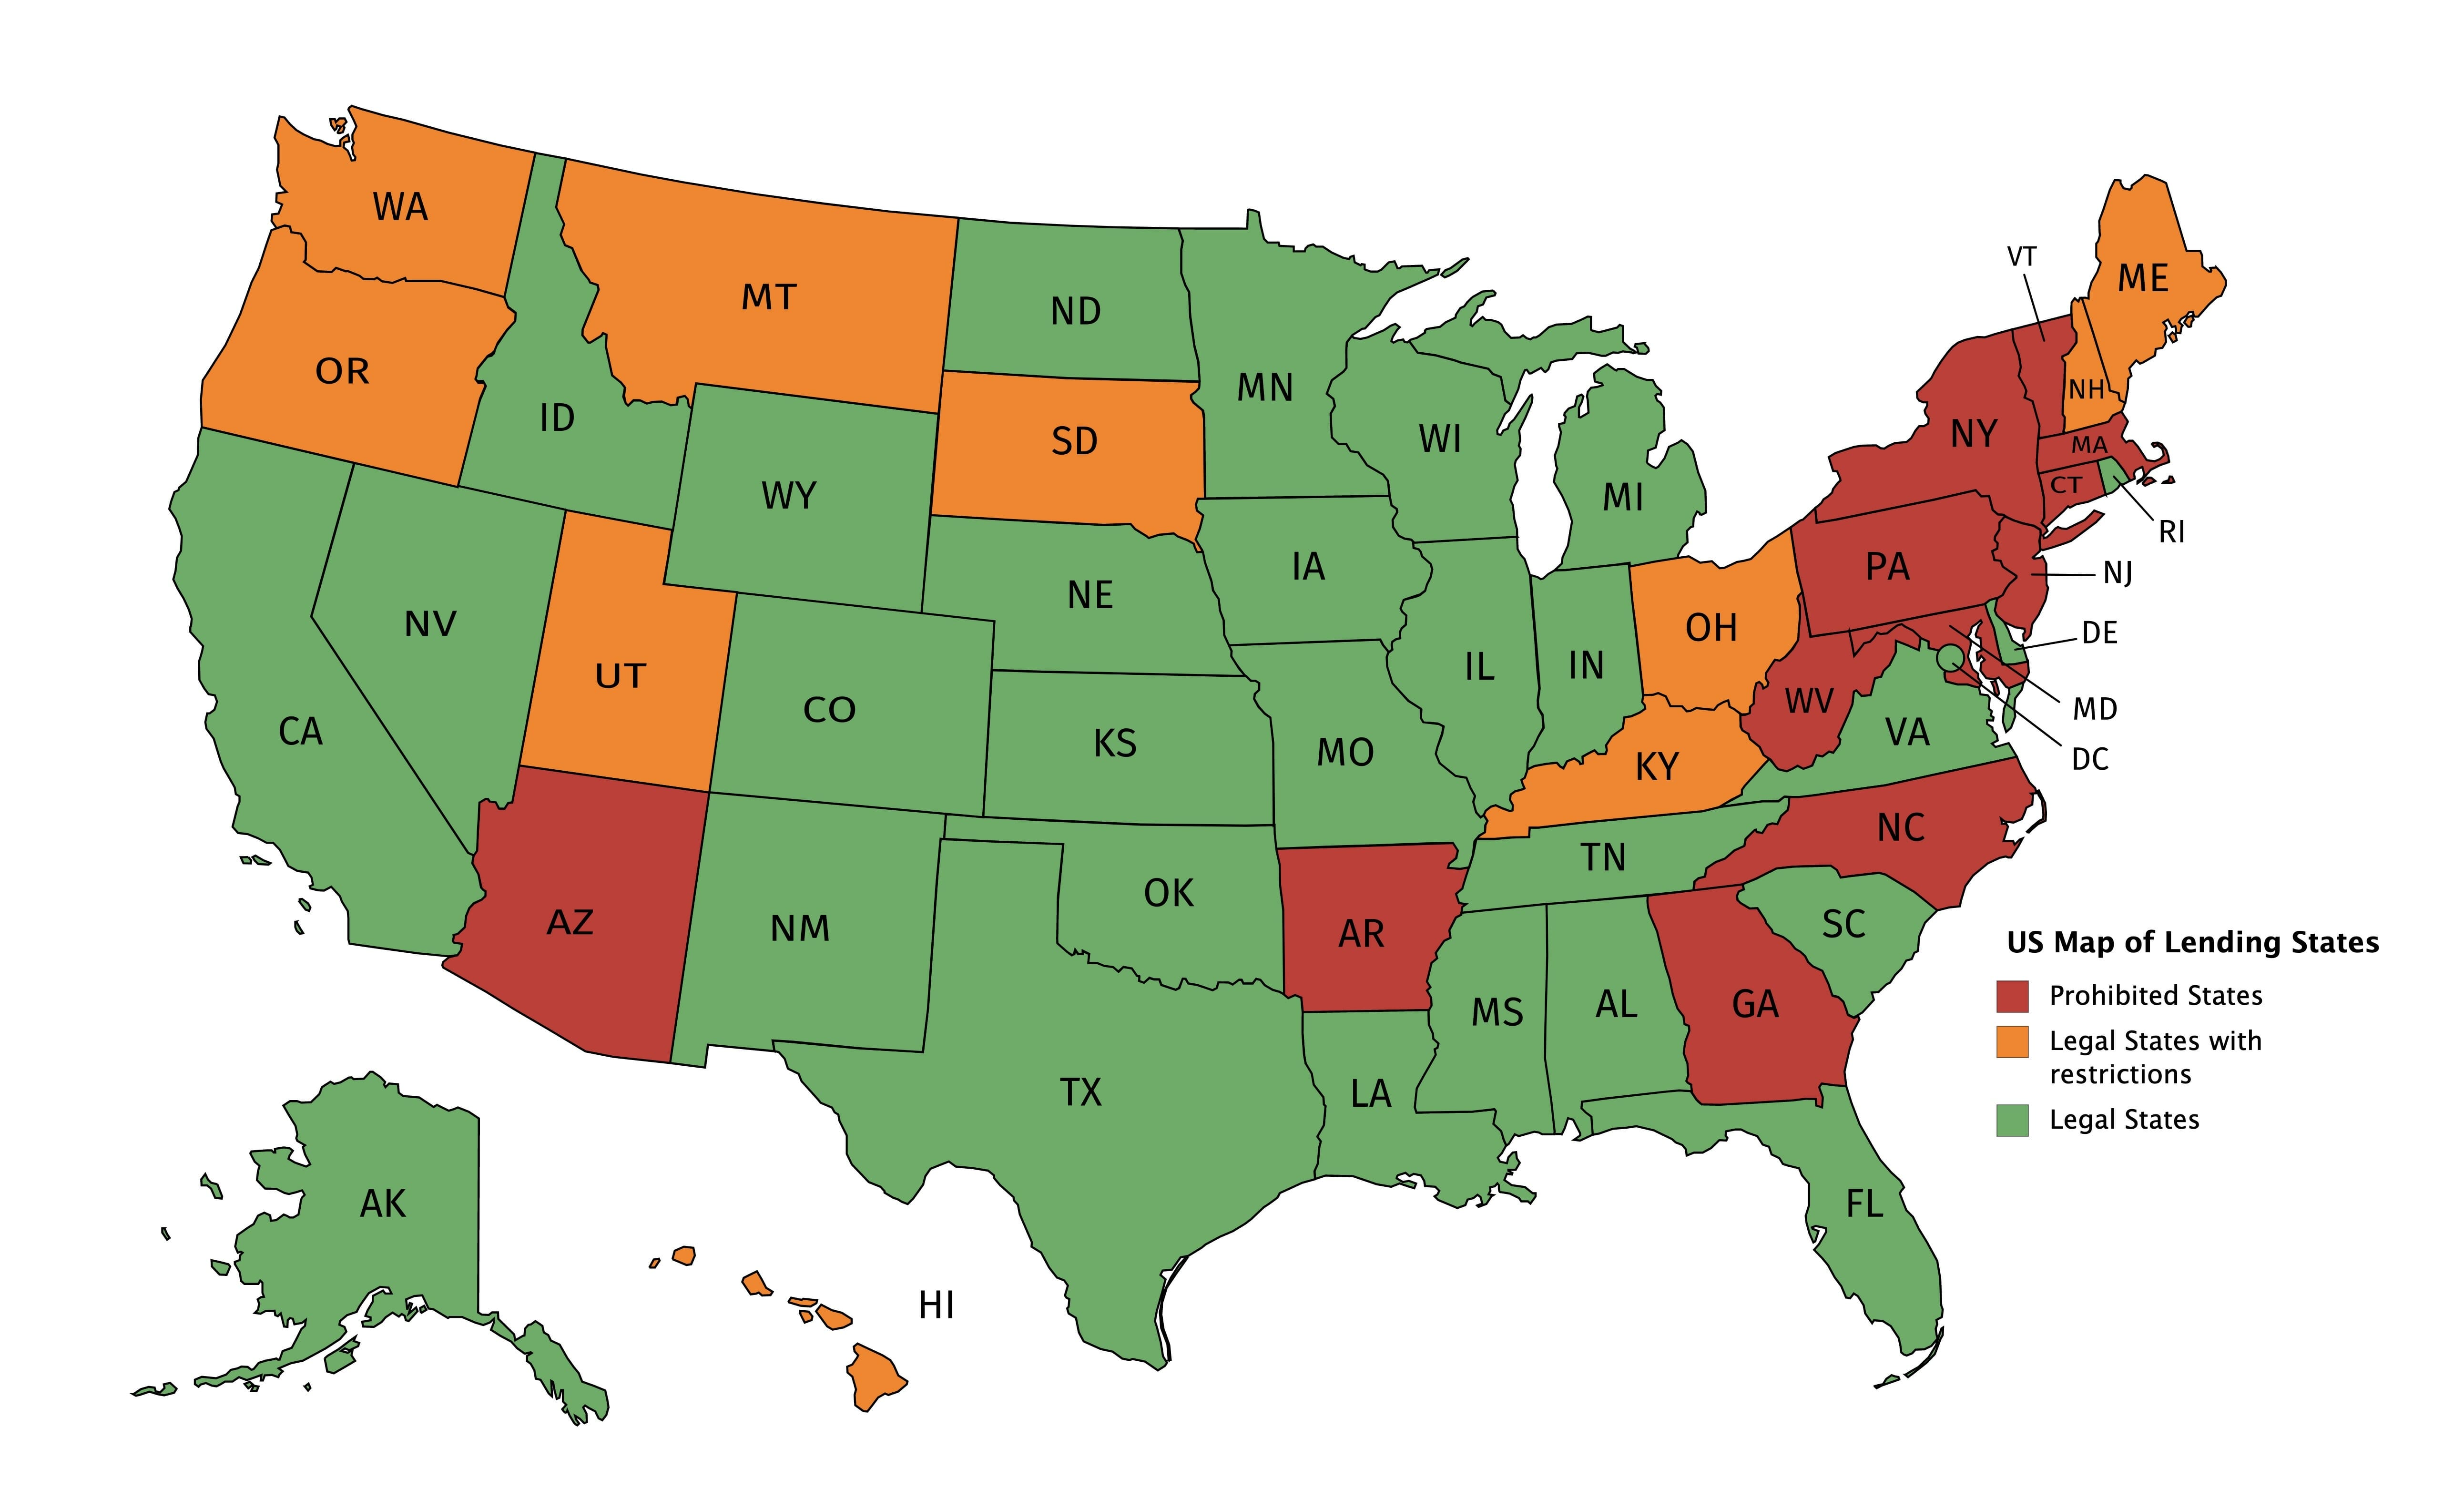 US Map of Lending States